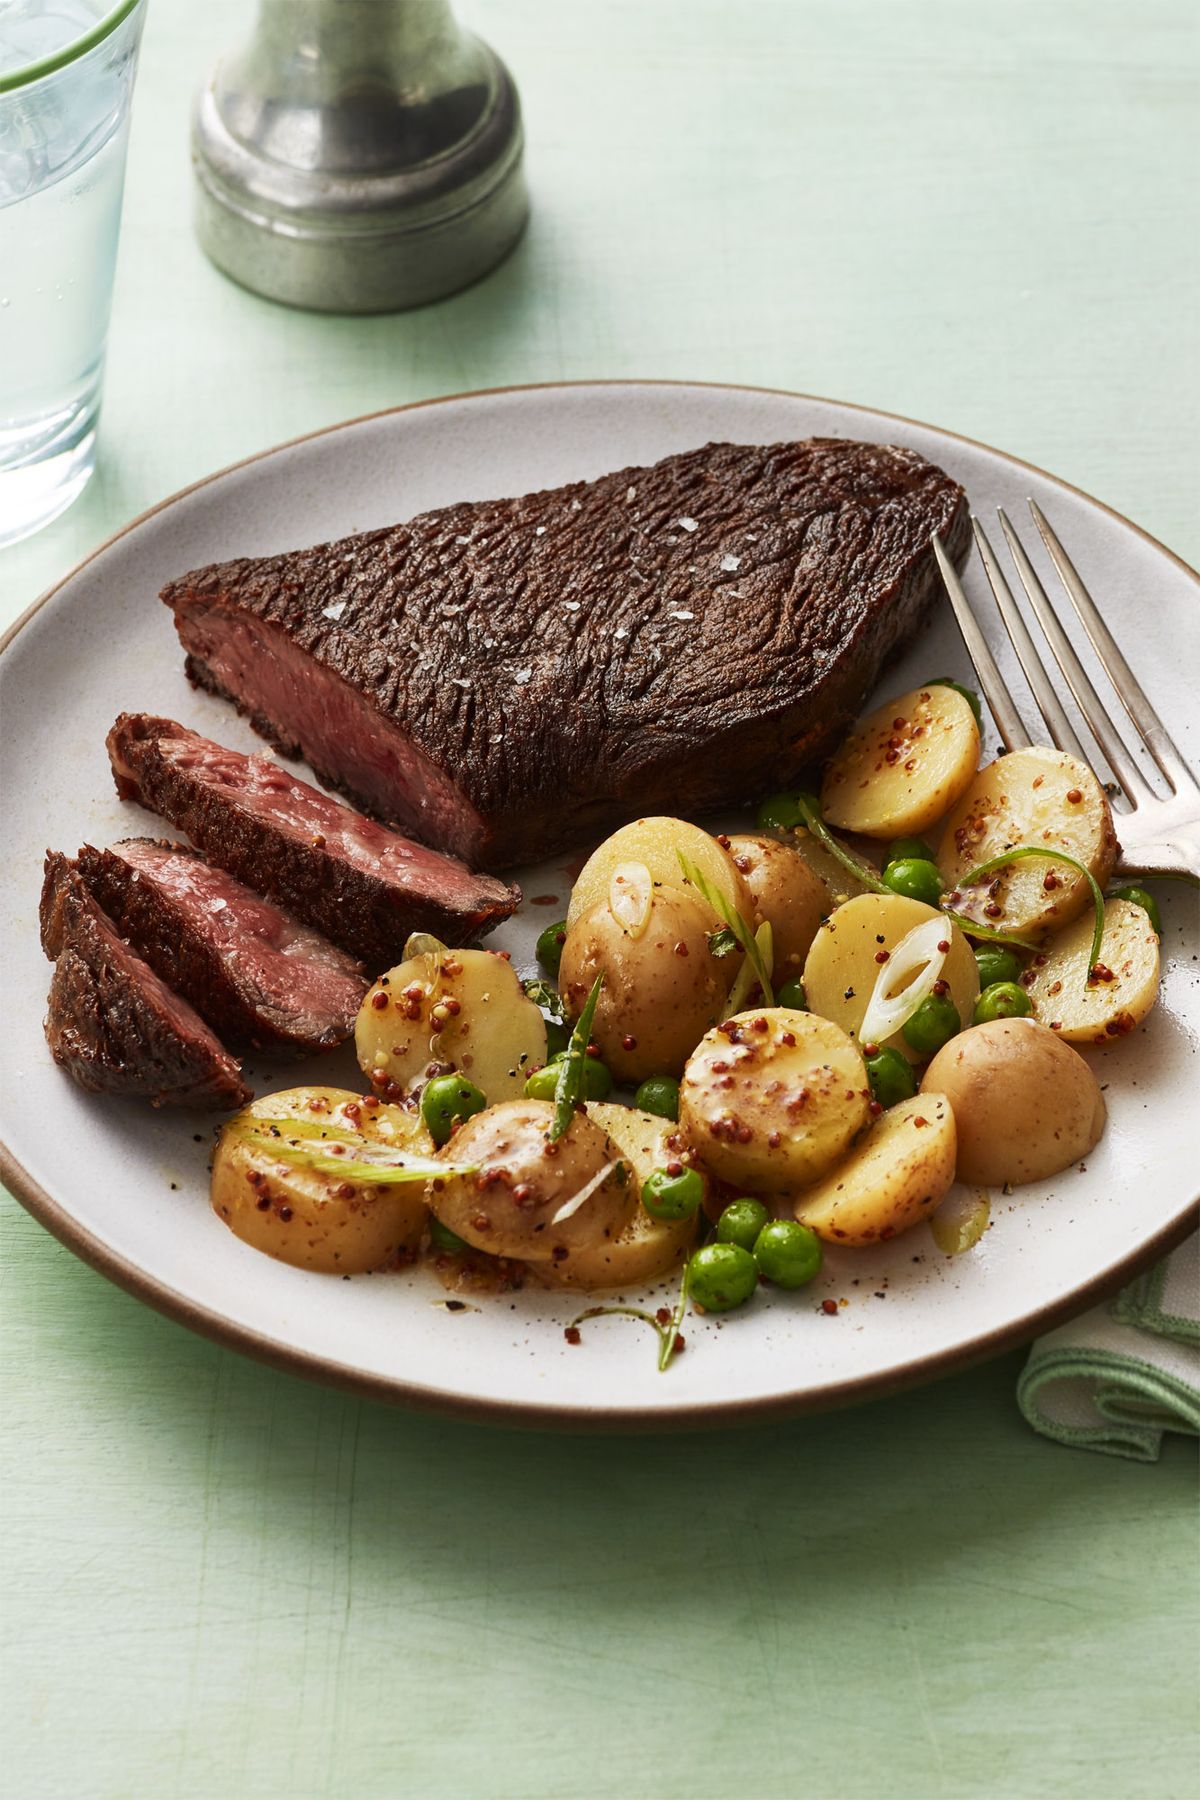 gluten free meals seared steak and potato salad with peas and radishes